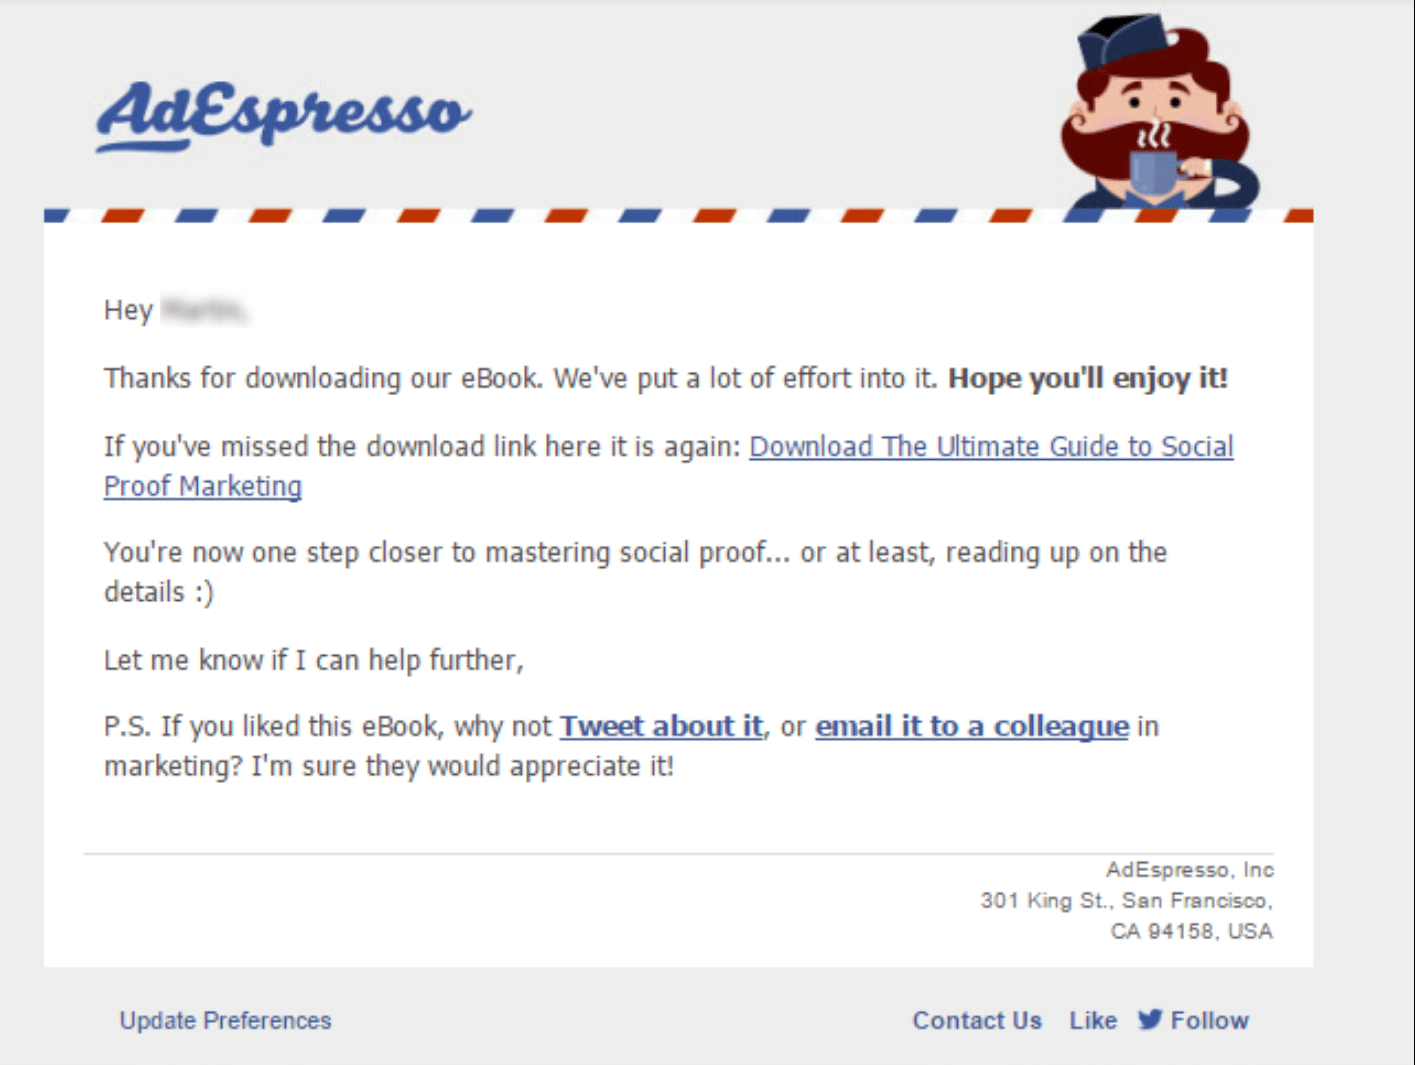 AdEspresso’s welcome email